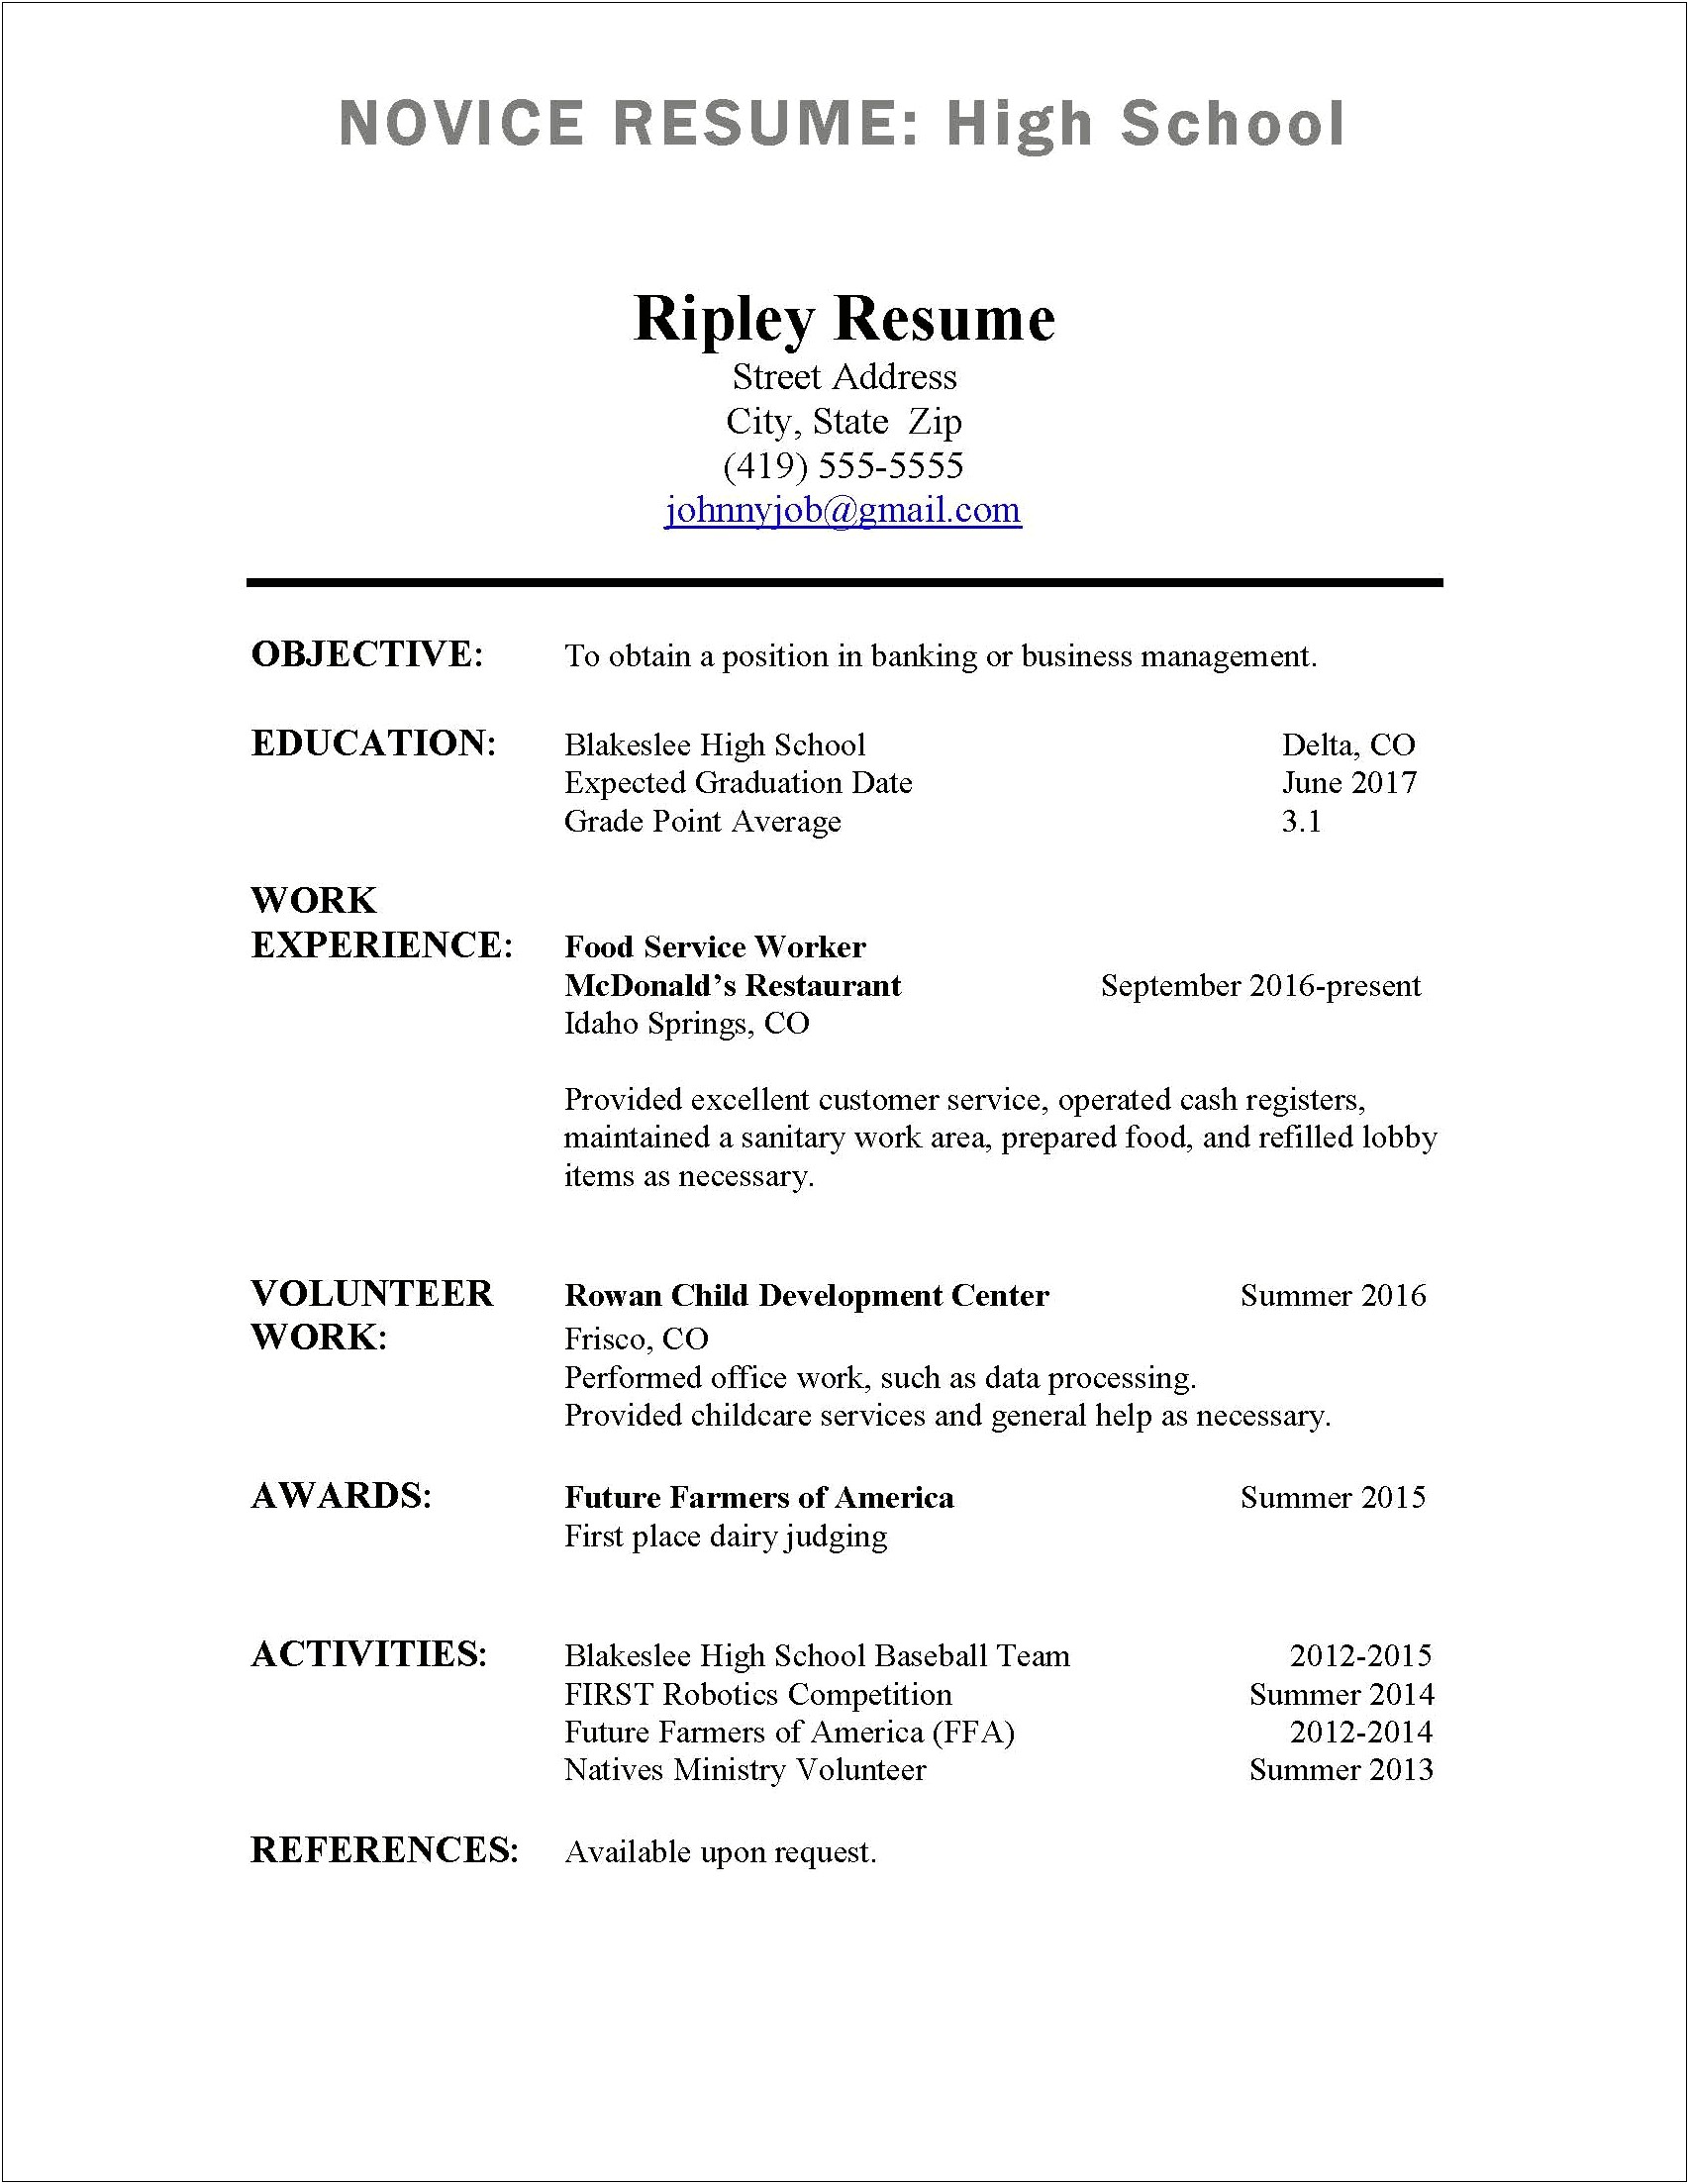 Example Of Graduation Date On Resume